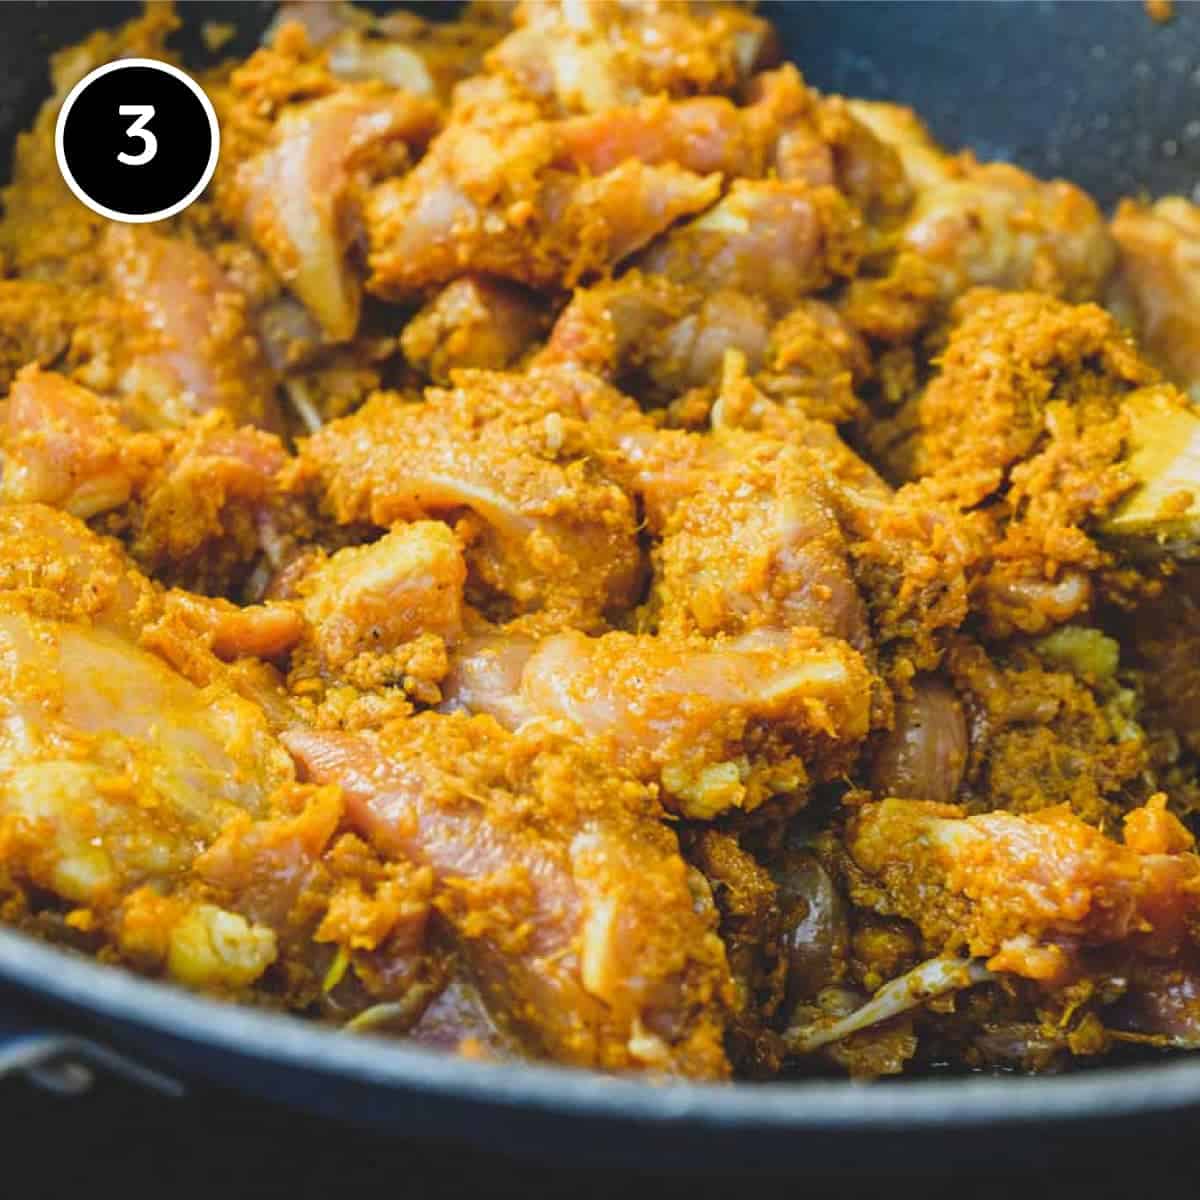 Curry paste and chicken thighs are combined for Malaysian Chicken Kapitan Curry (Kari Kapitan).